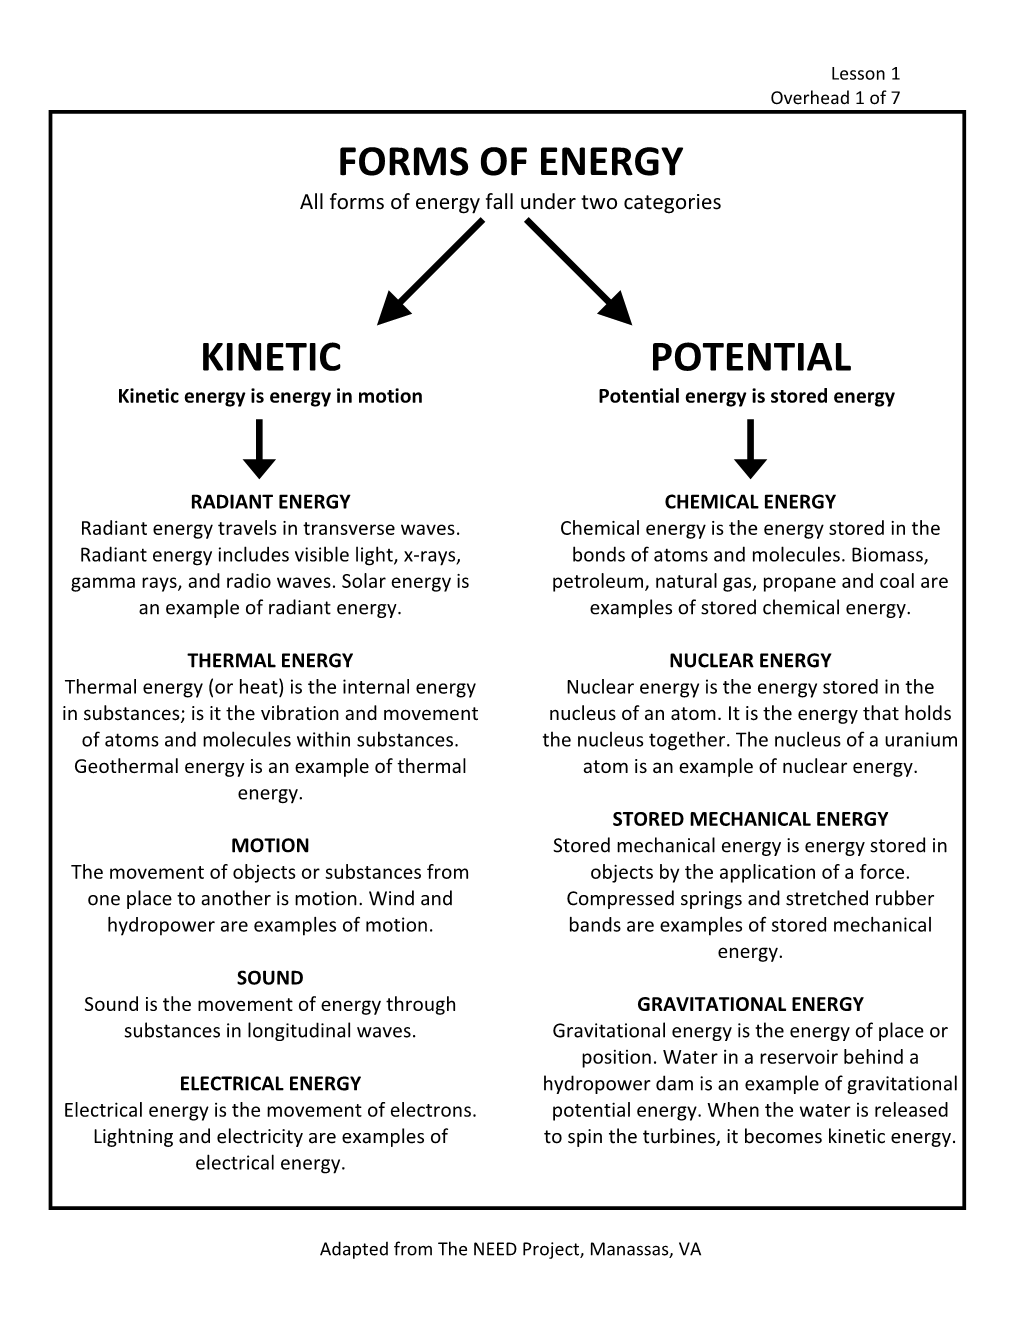 Forms of Energy Kinetic Potential